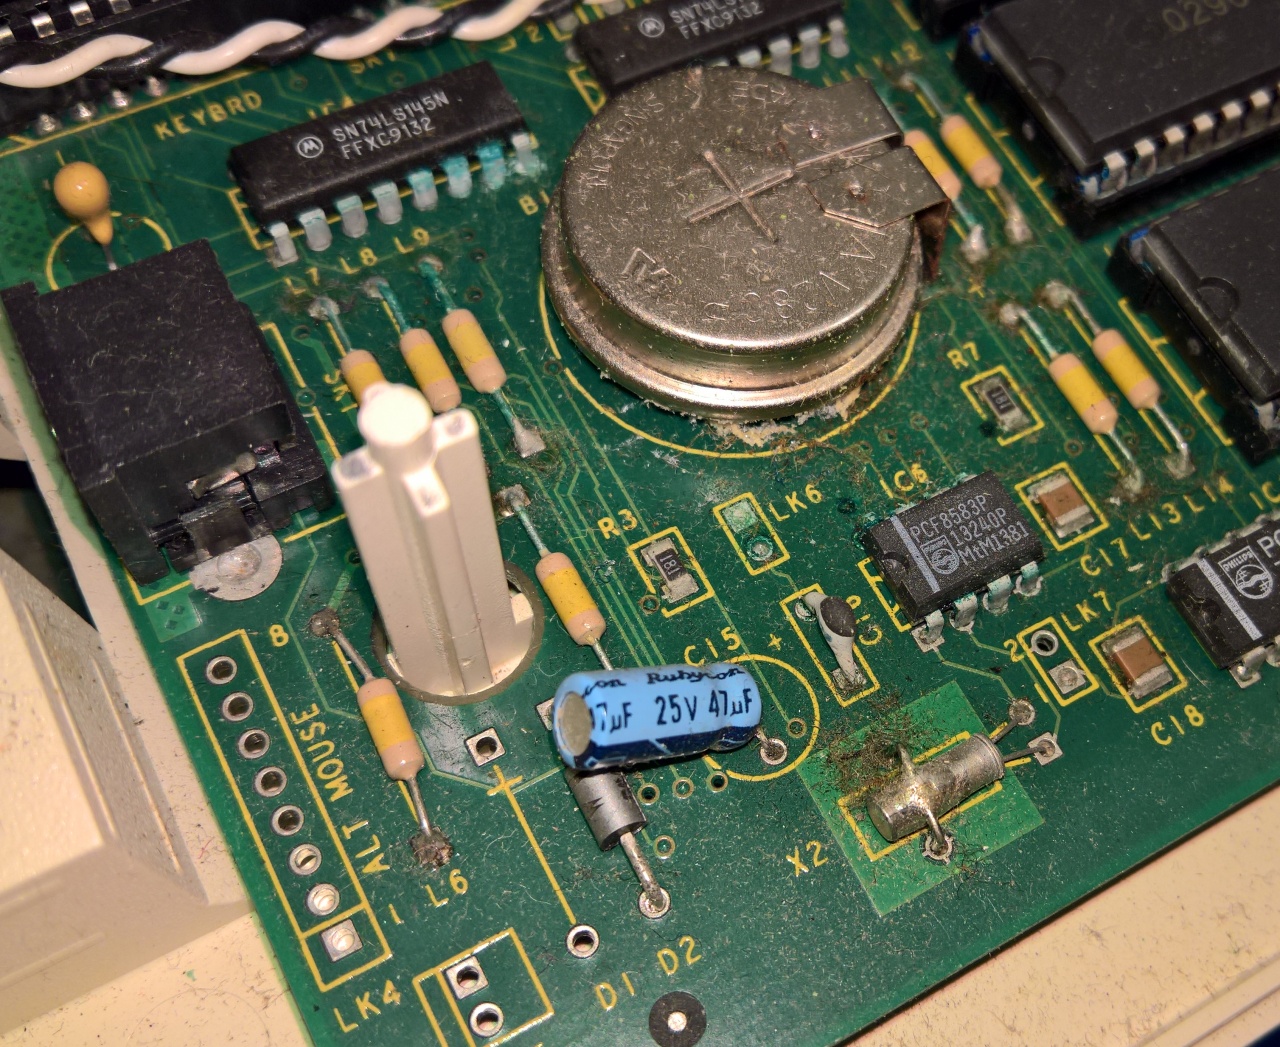 Acorn Archimedes A3000 - Amiga Mouse Conversion & Battery leakage Repair. www.tfw8b.com